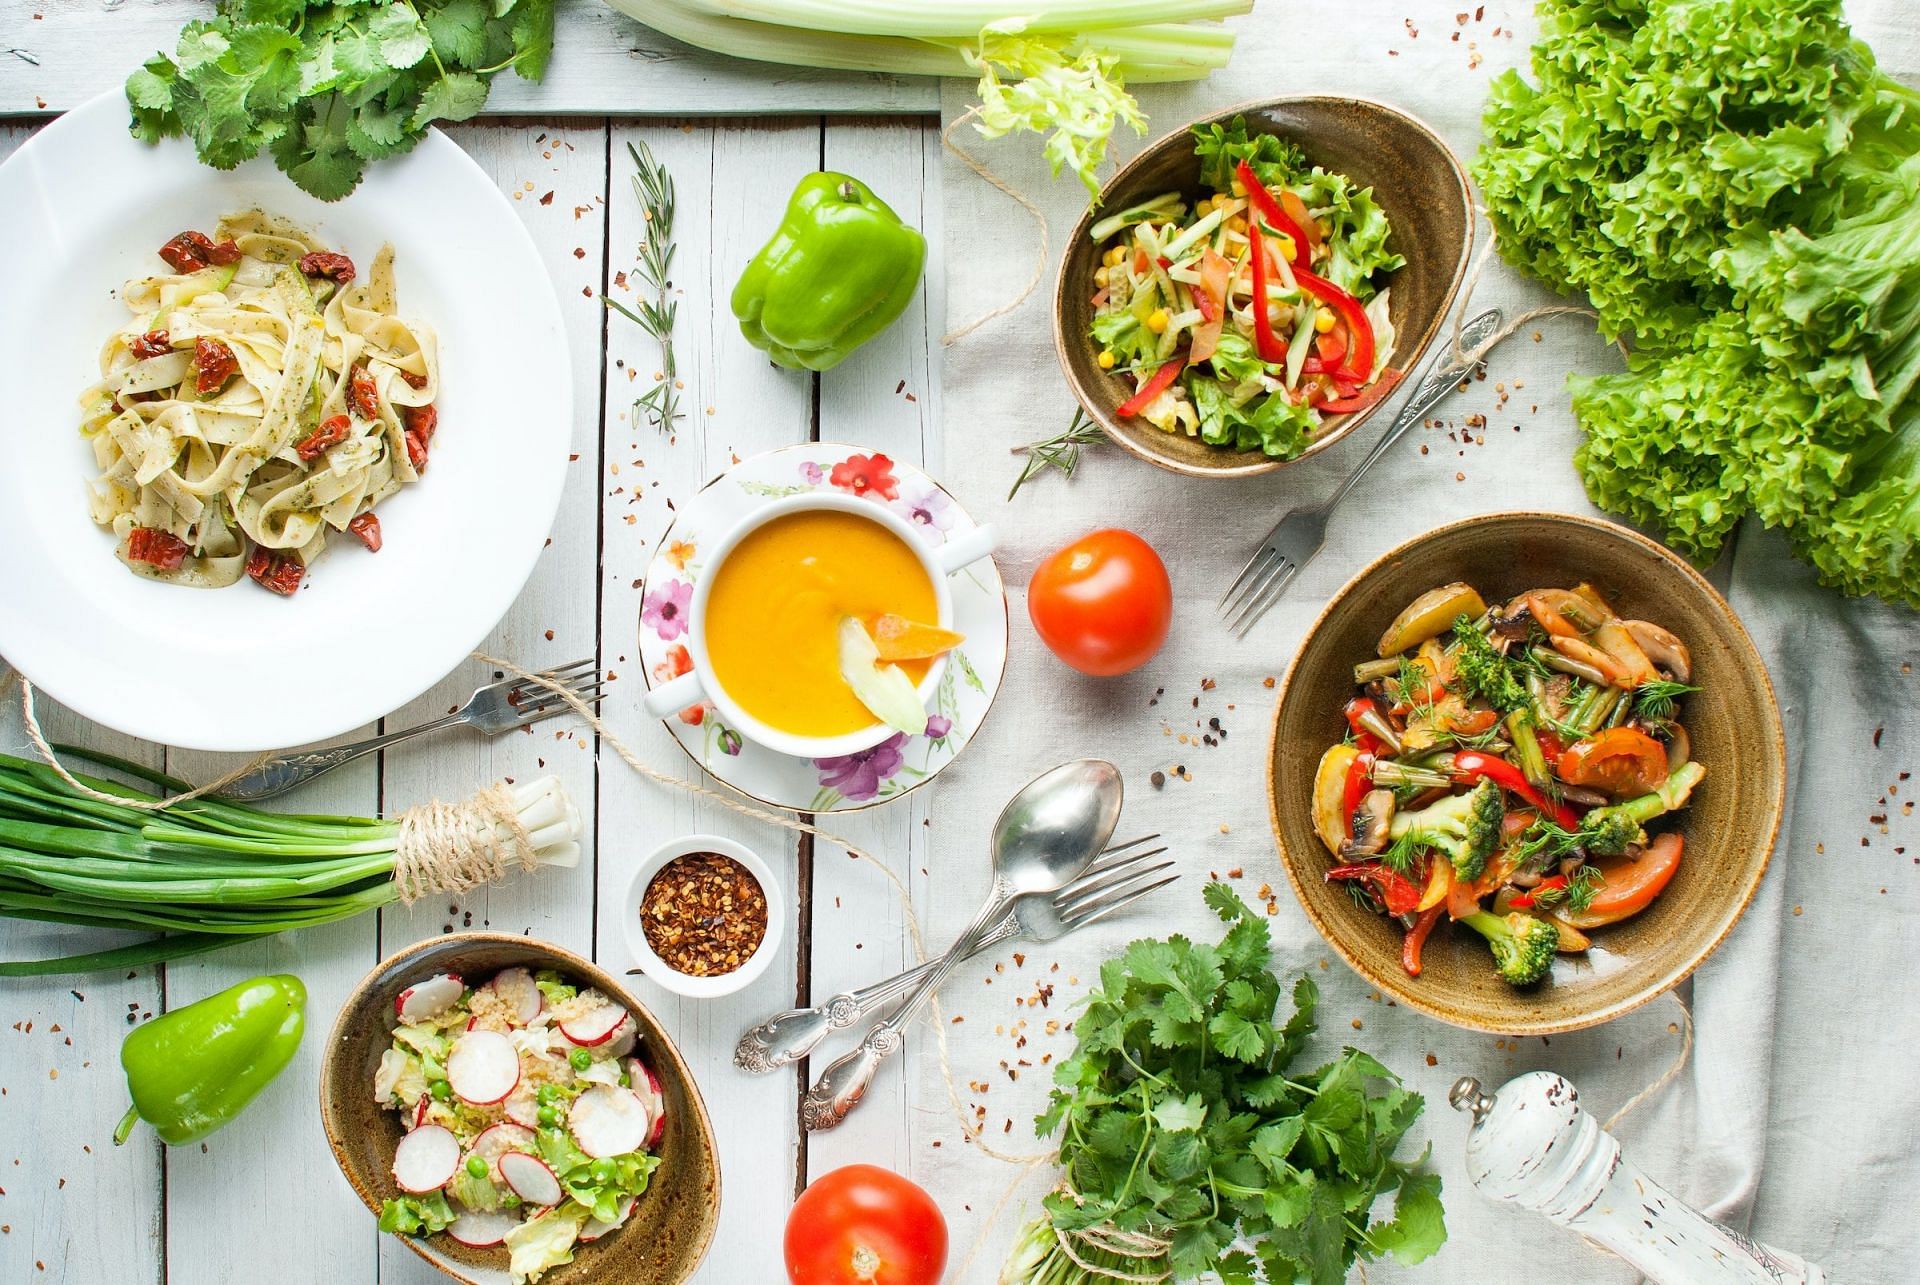 Detoxification with healthy food (Image via Unsplash/Victoria Shes)